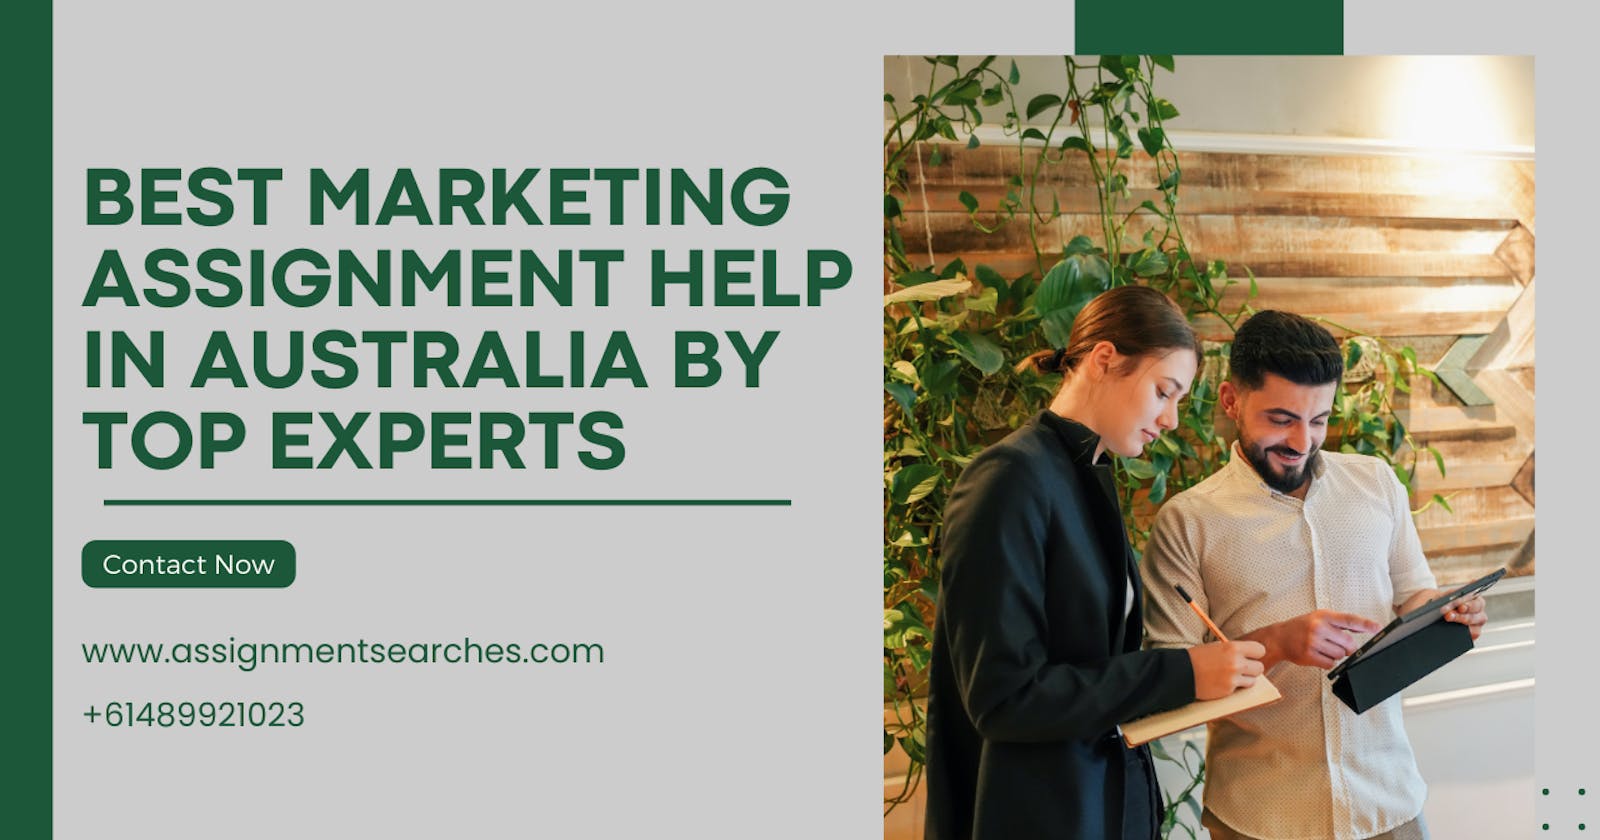 Best Marketing Assignment Help In Australia By Top Experts